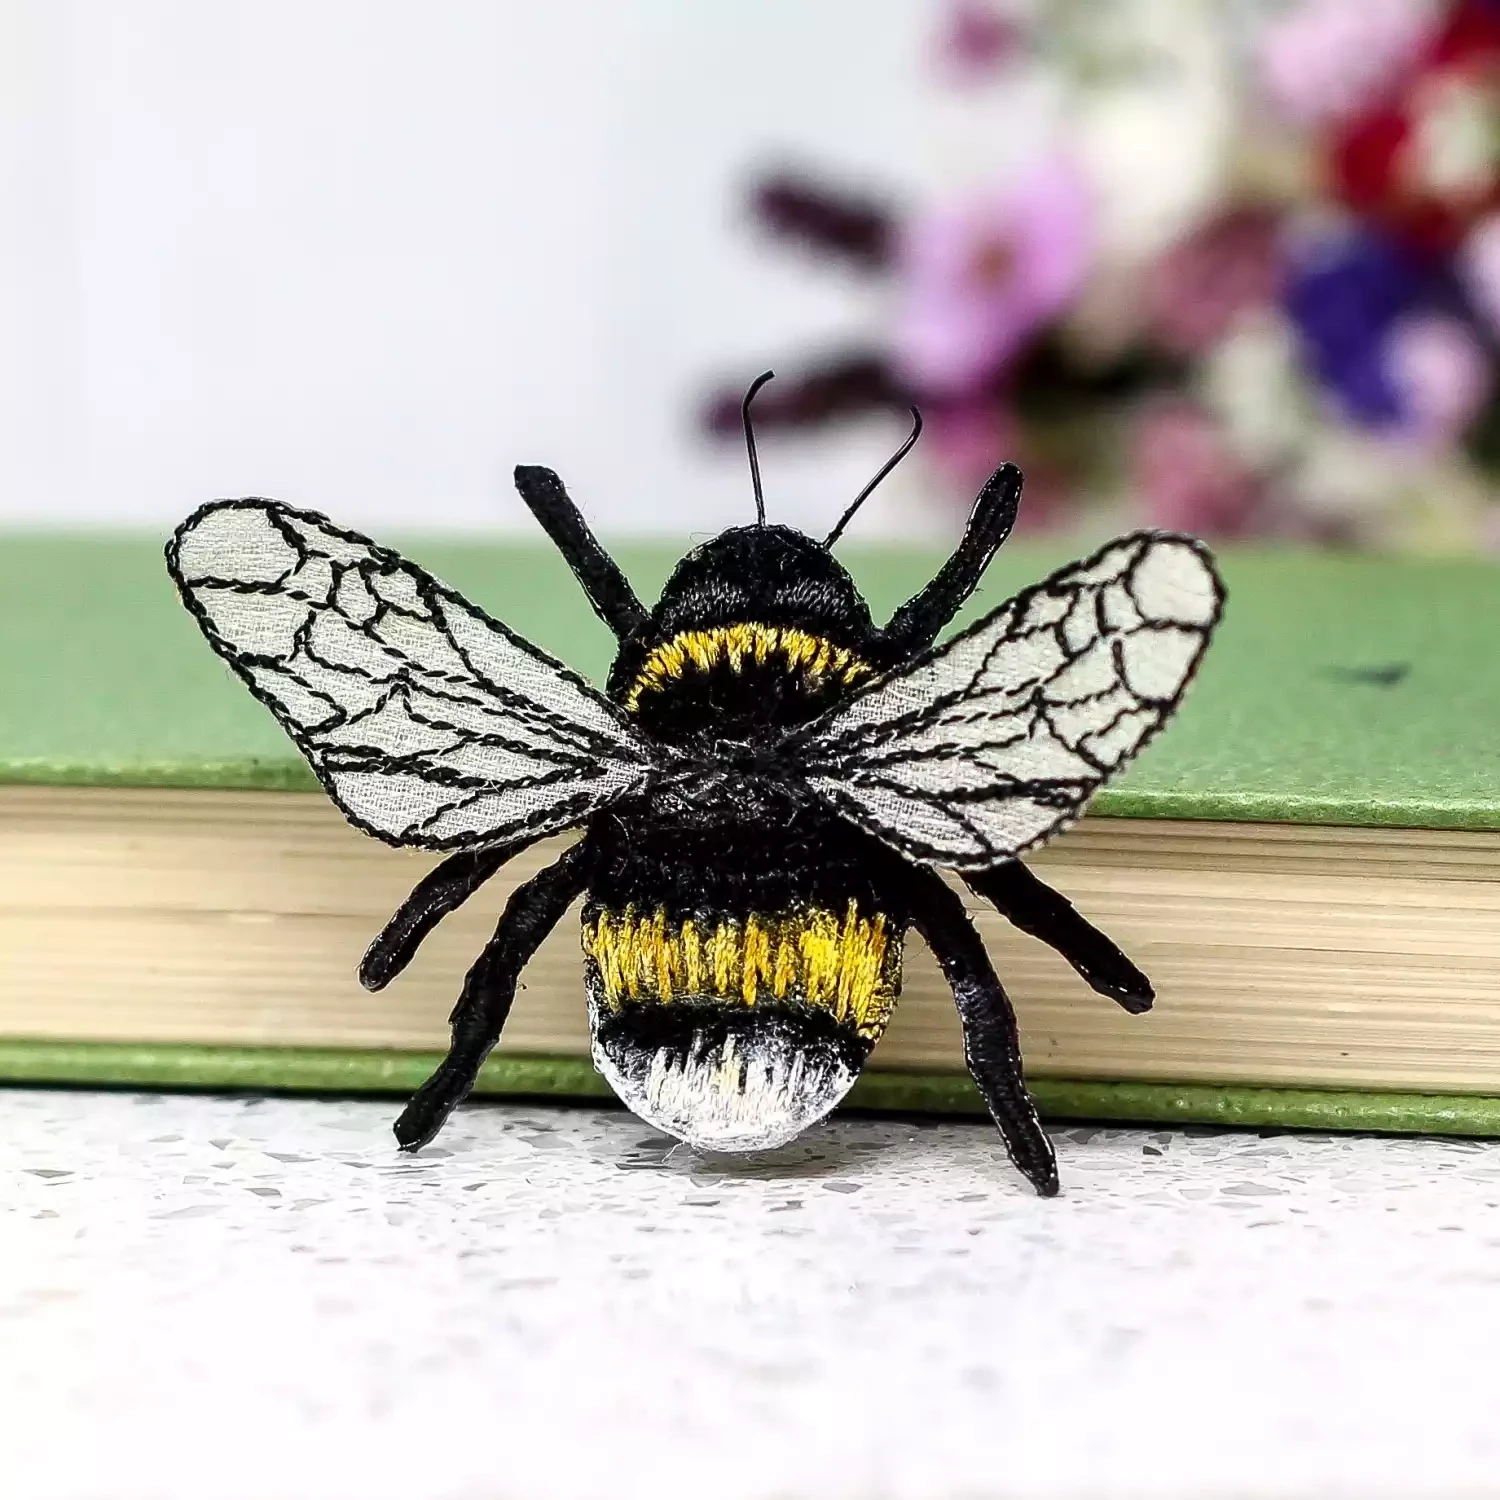 Hand Painted and Embroidered Fabric Brooch - White Tailed Bumble Bee by Vikki Lafford Garside